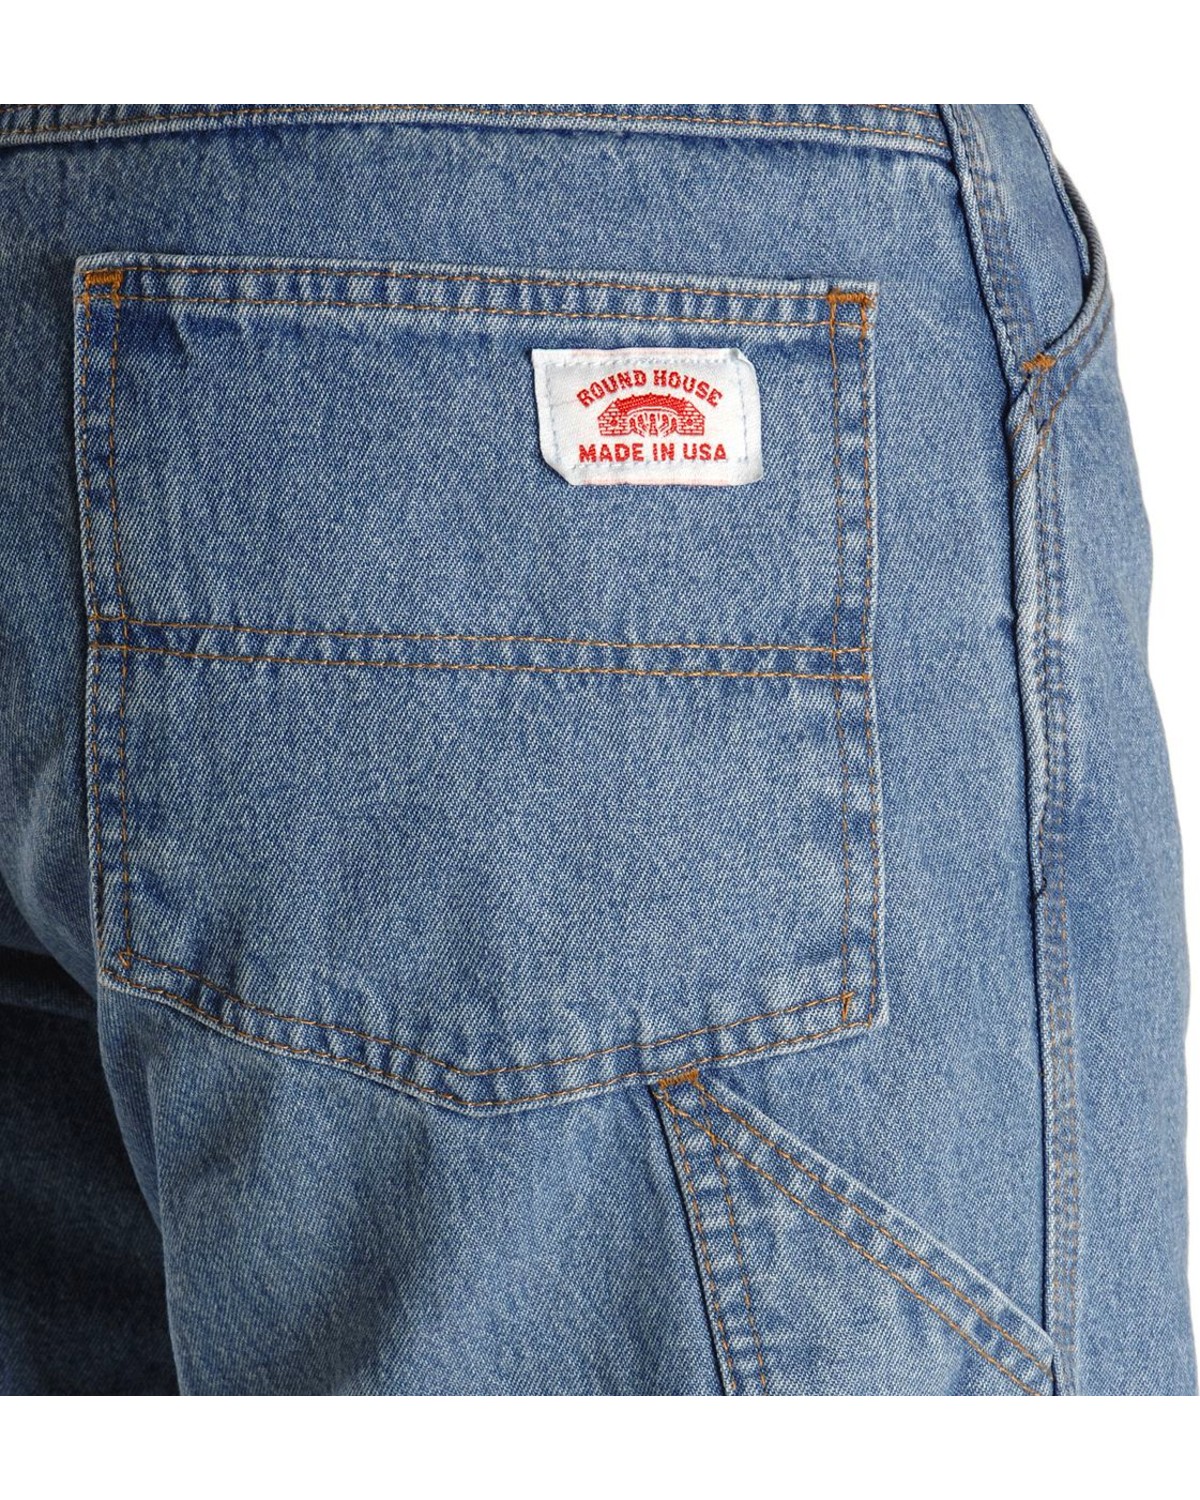 U.S.A. Made Round House Jeans - Dungaree Relaxed Fit | Sheplers